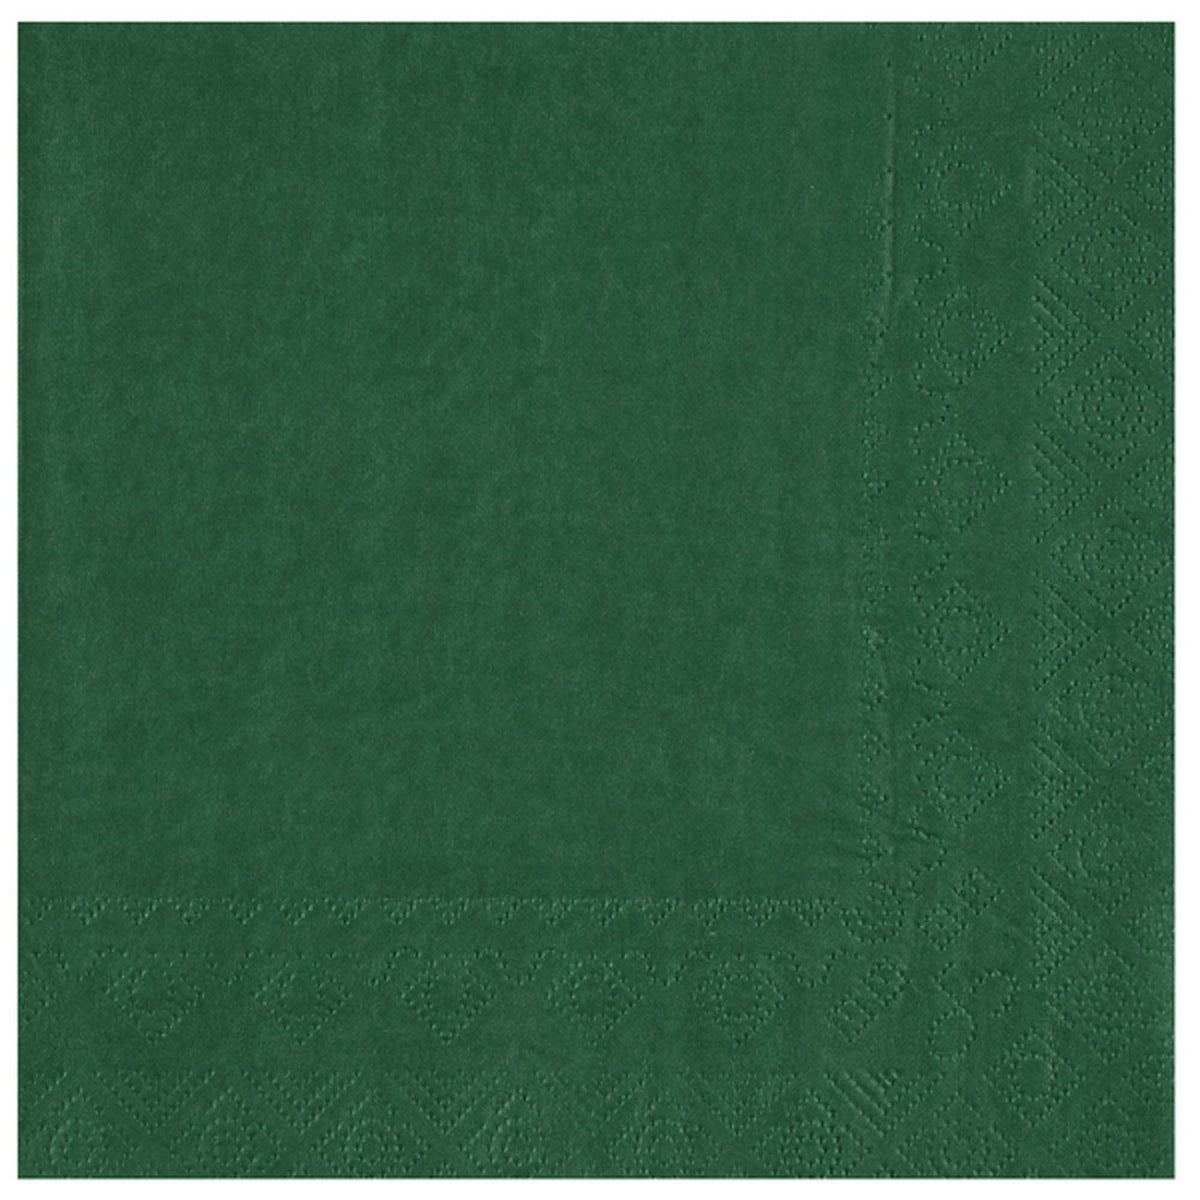 SANTEX Everyday Entertaining Dark Green Large Lunch Paper Party Napkins, 25 Count 3660380090920